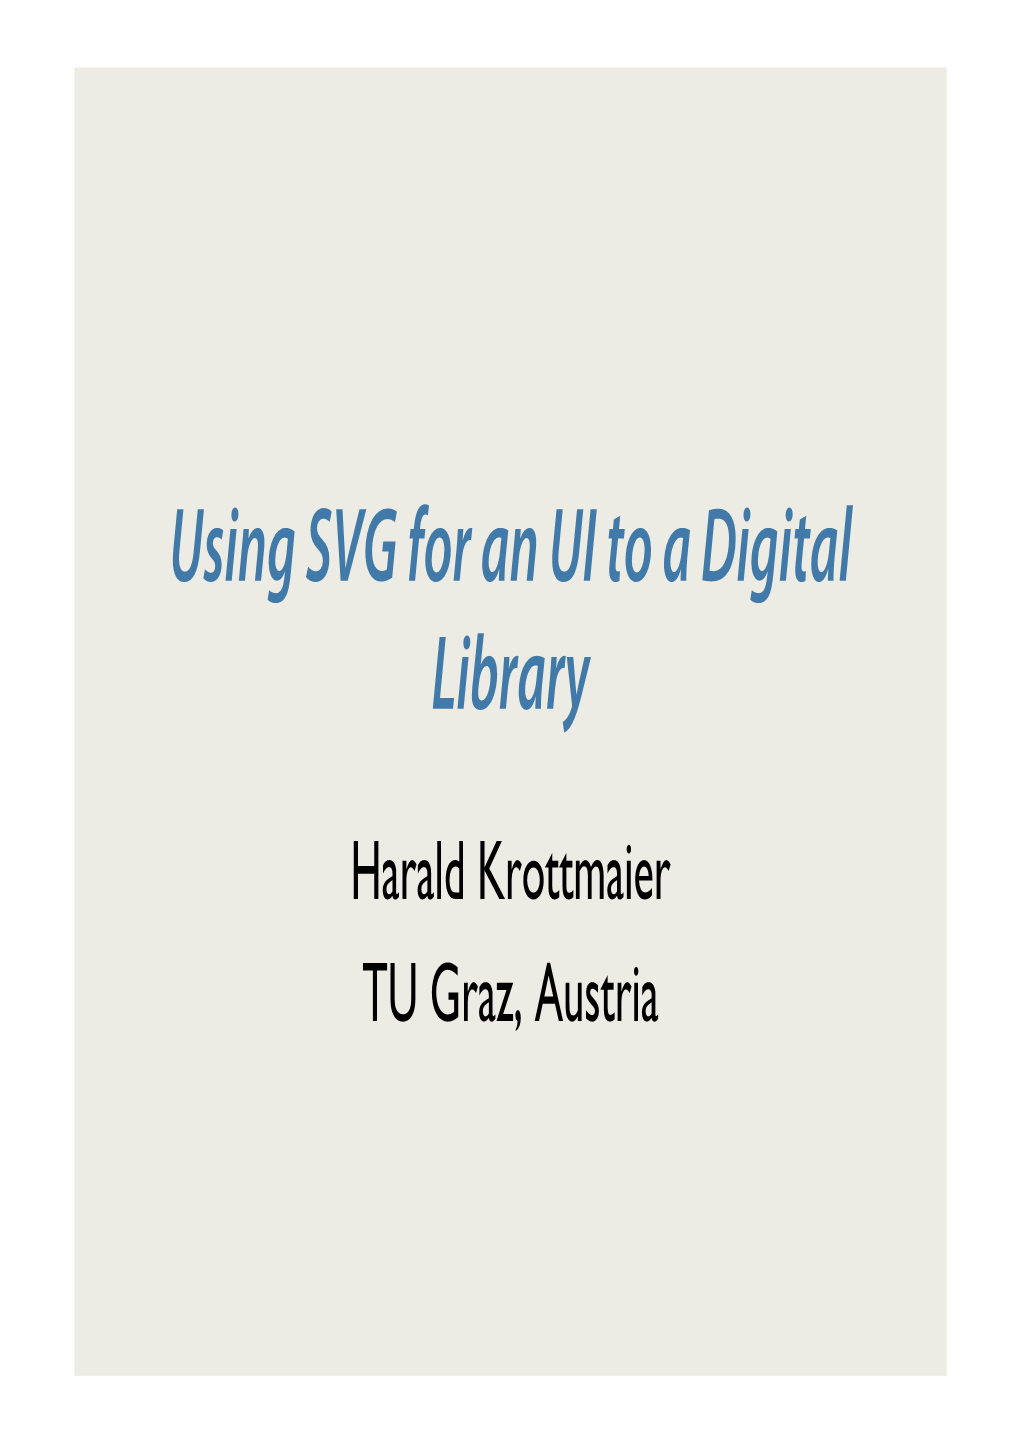 Using SVG for an UI to a Digital Library